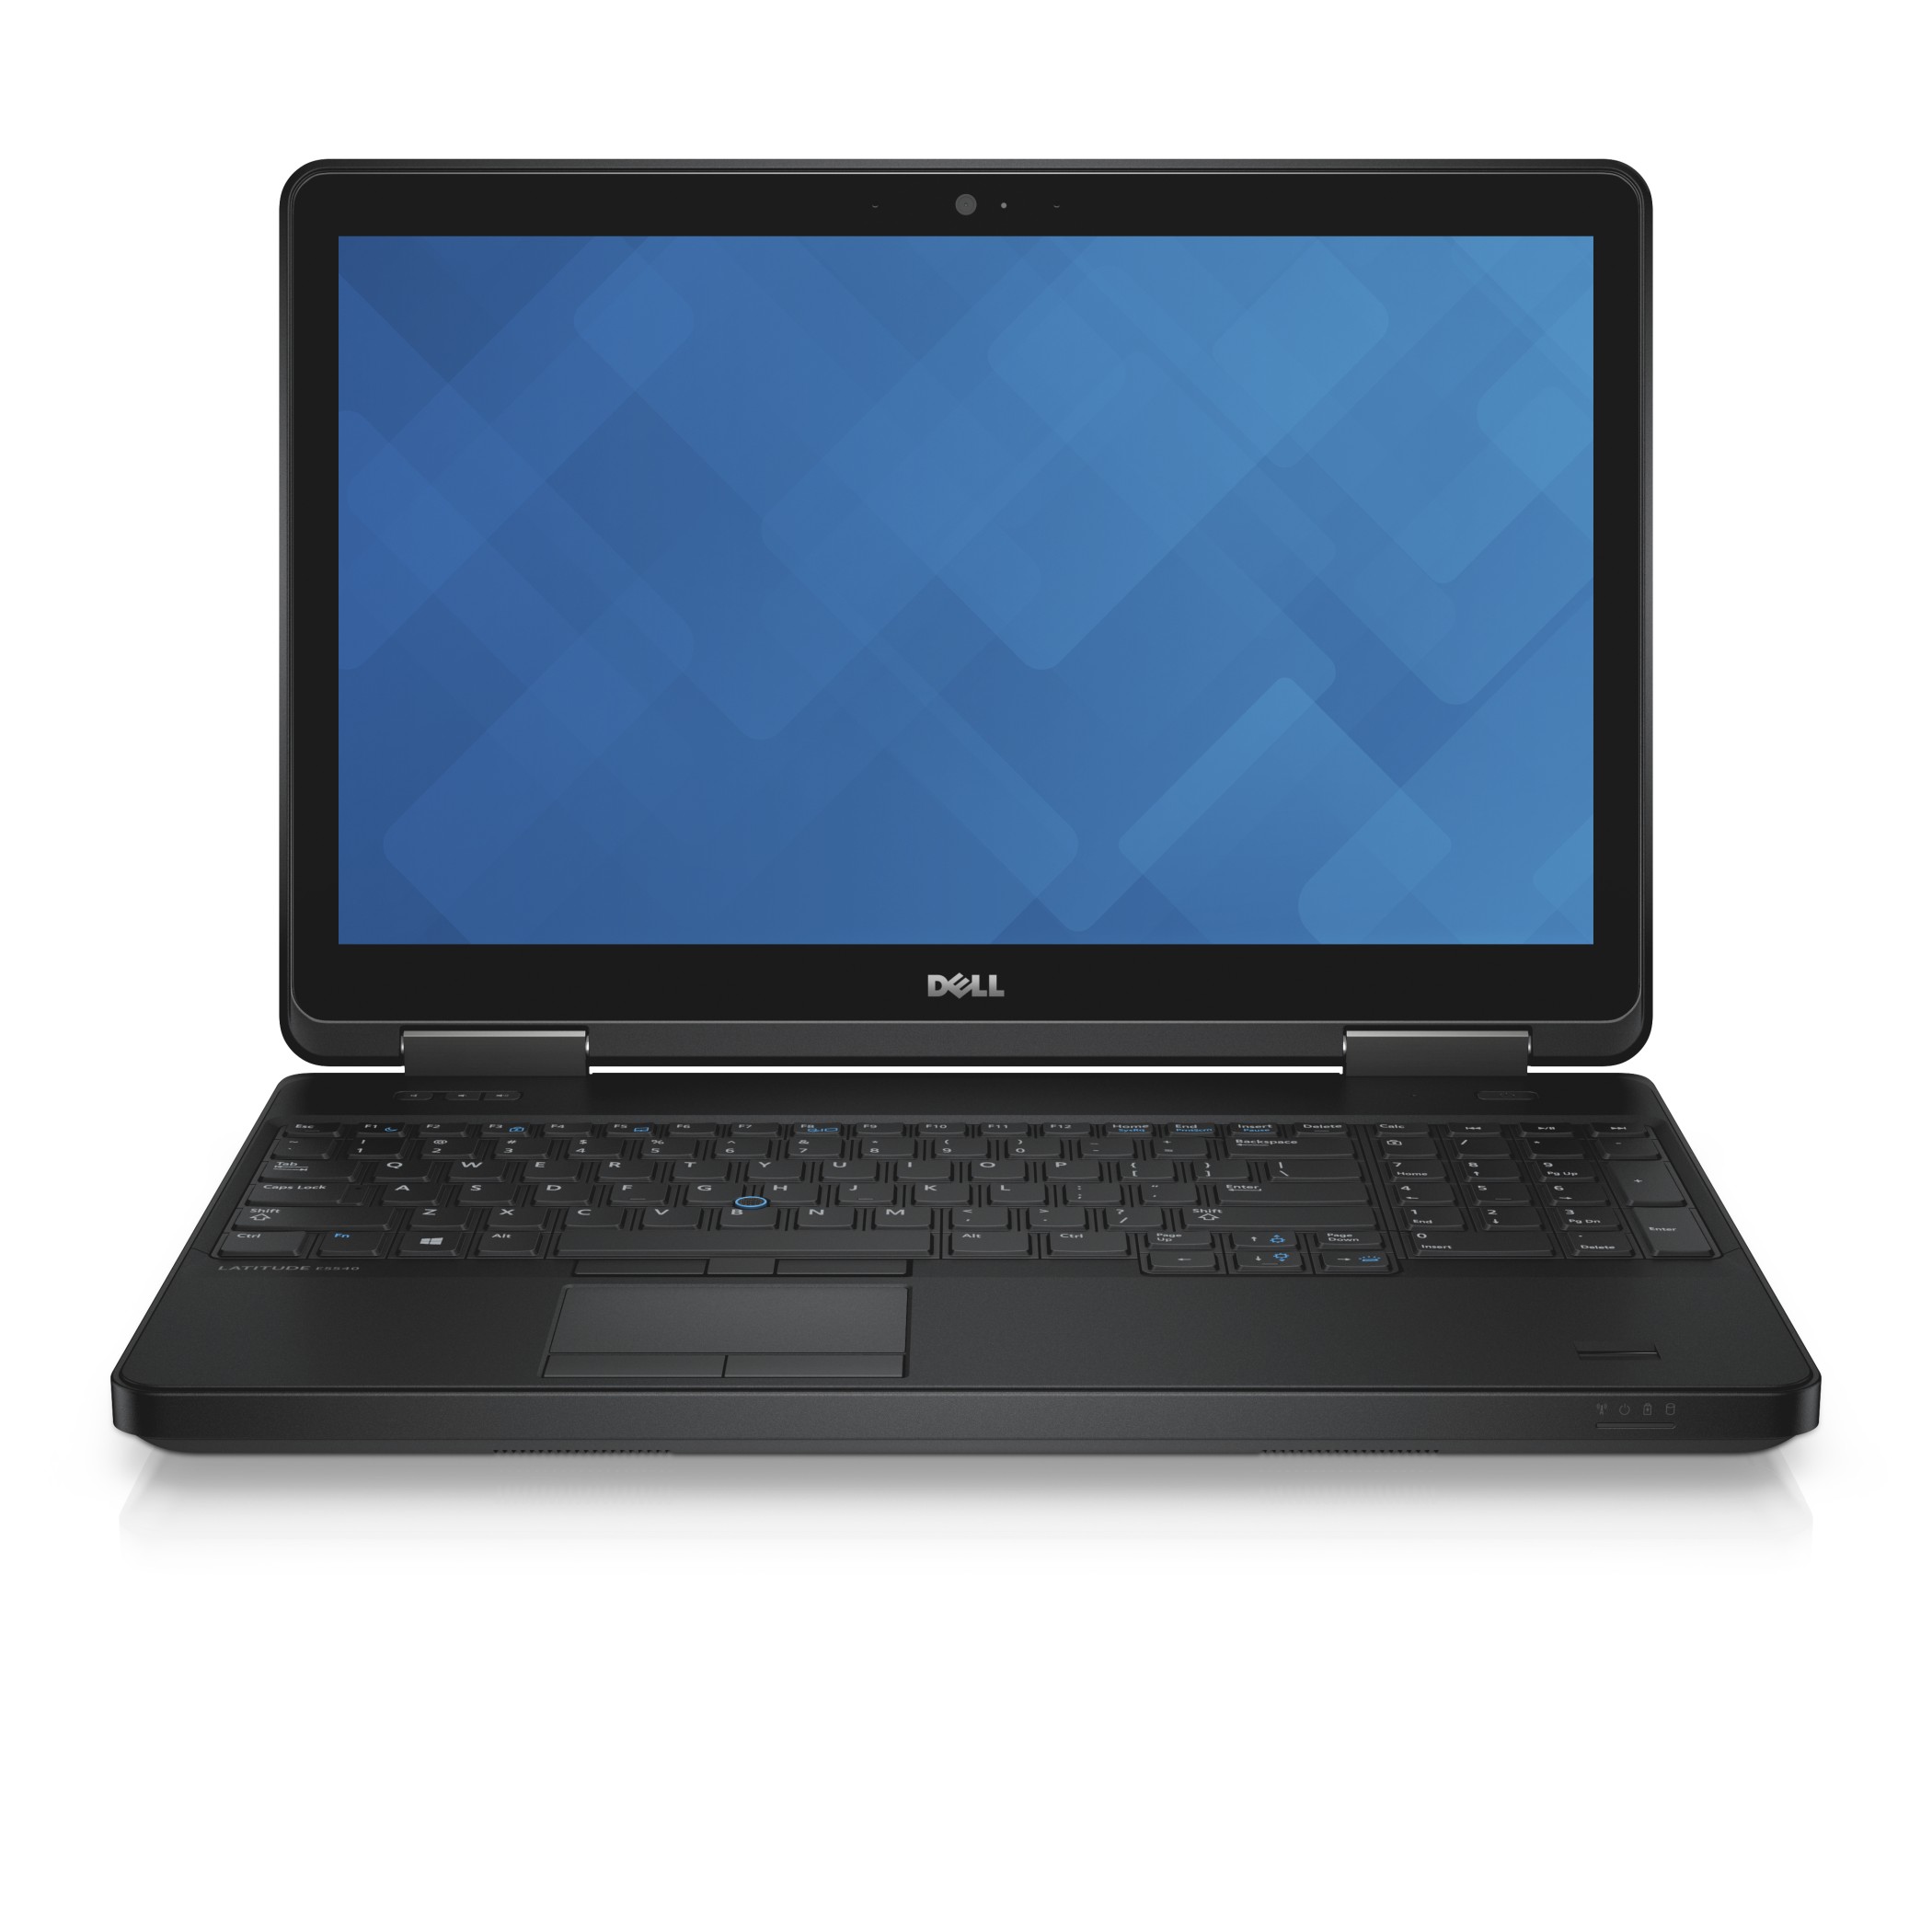 Dell Latitude 15 Touch 5000 Series (Model E5540 Touch) 15-inch notebook / laptop computer